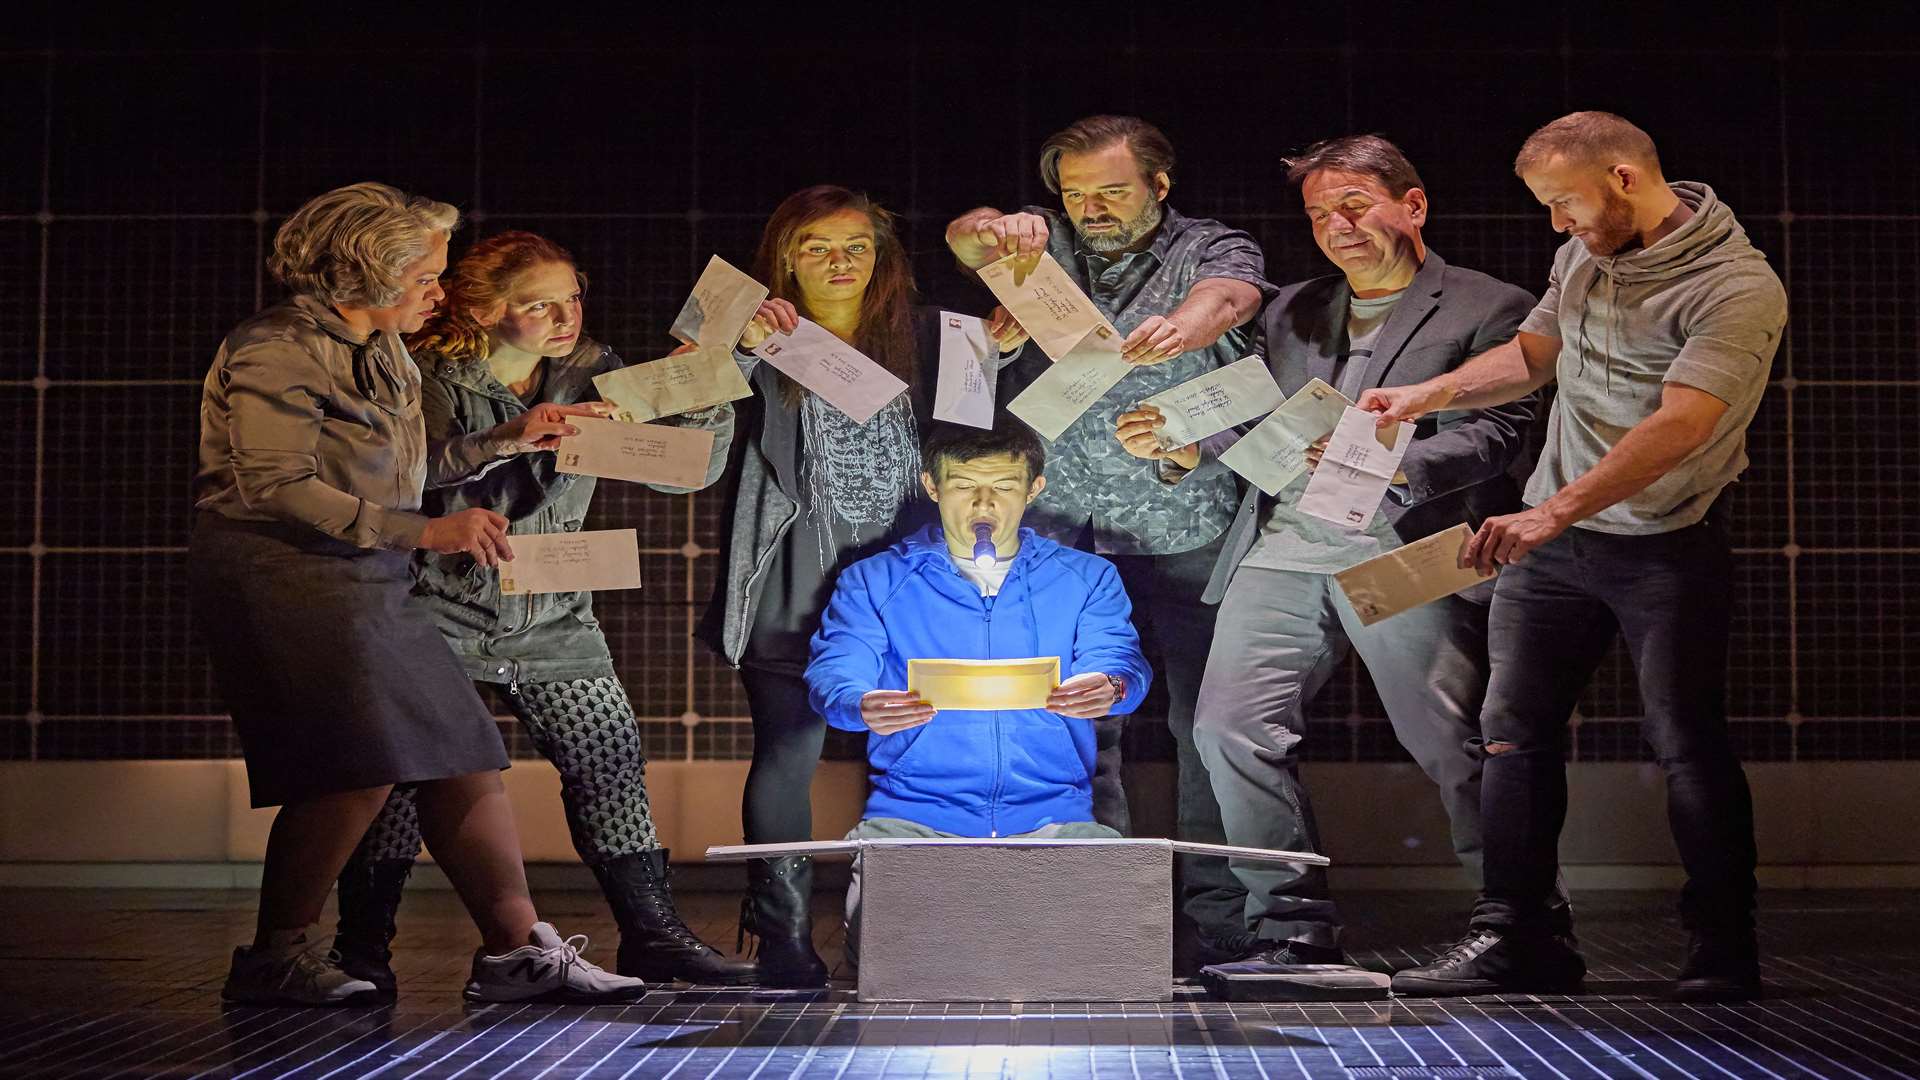 Mark Haddon's bestselling book The Curious Incident of the Dog in the Night-Time has been turned into a stage show